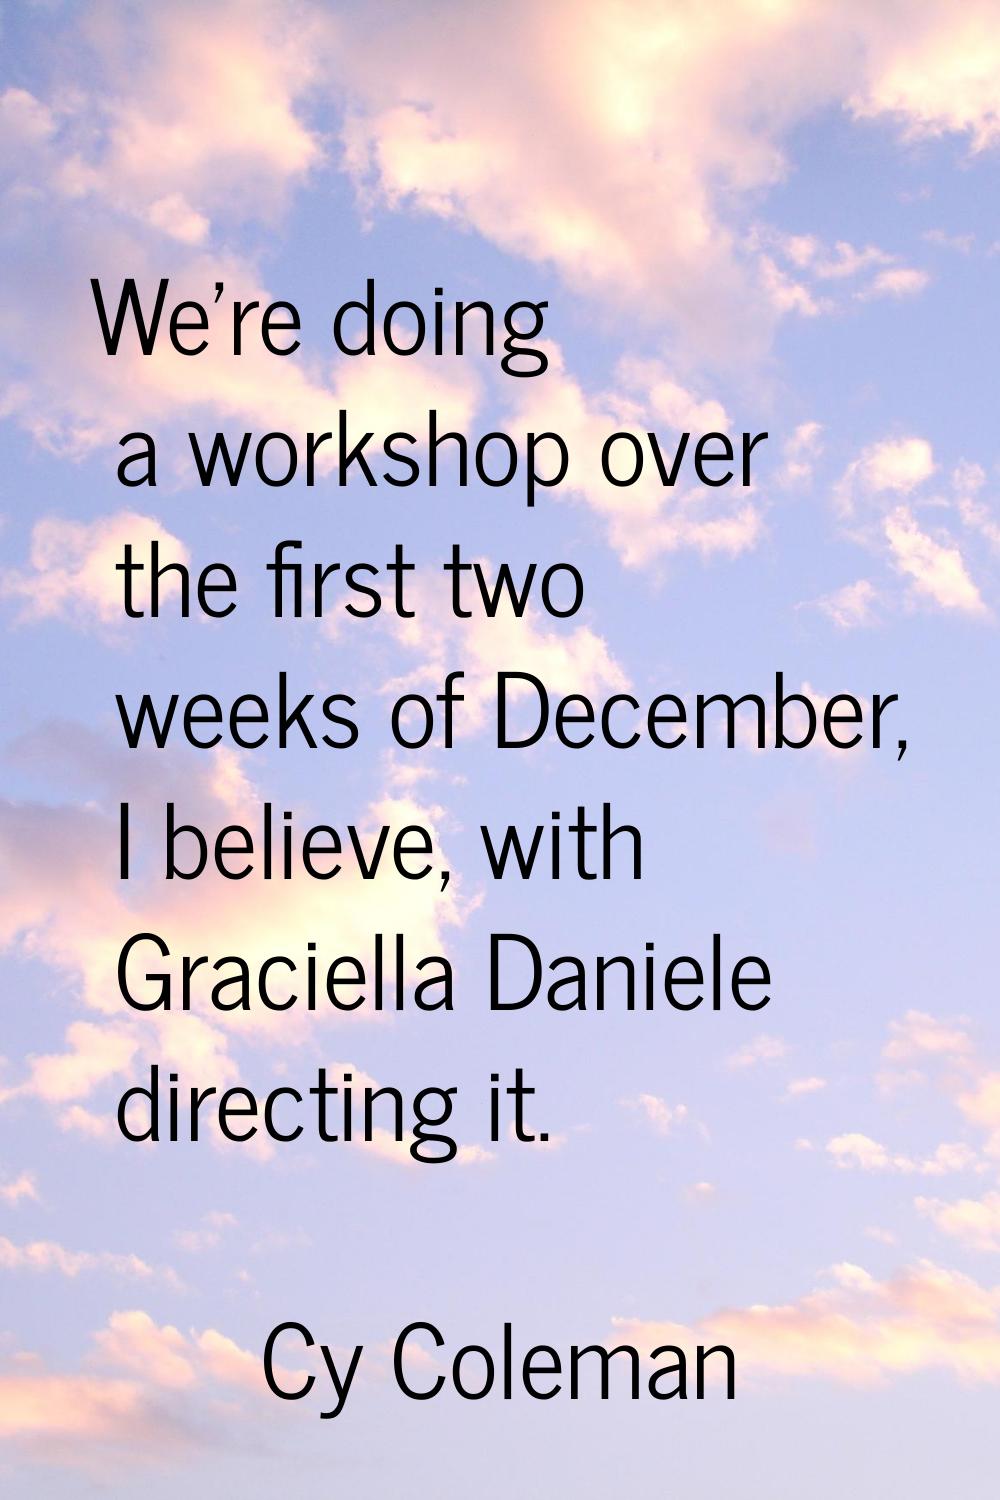 We're doing a workshop over the first two weeks of December, I believe, with Graciella Daniele dire